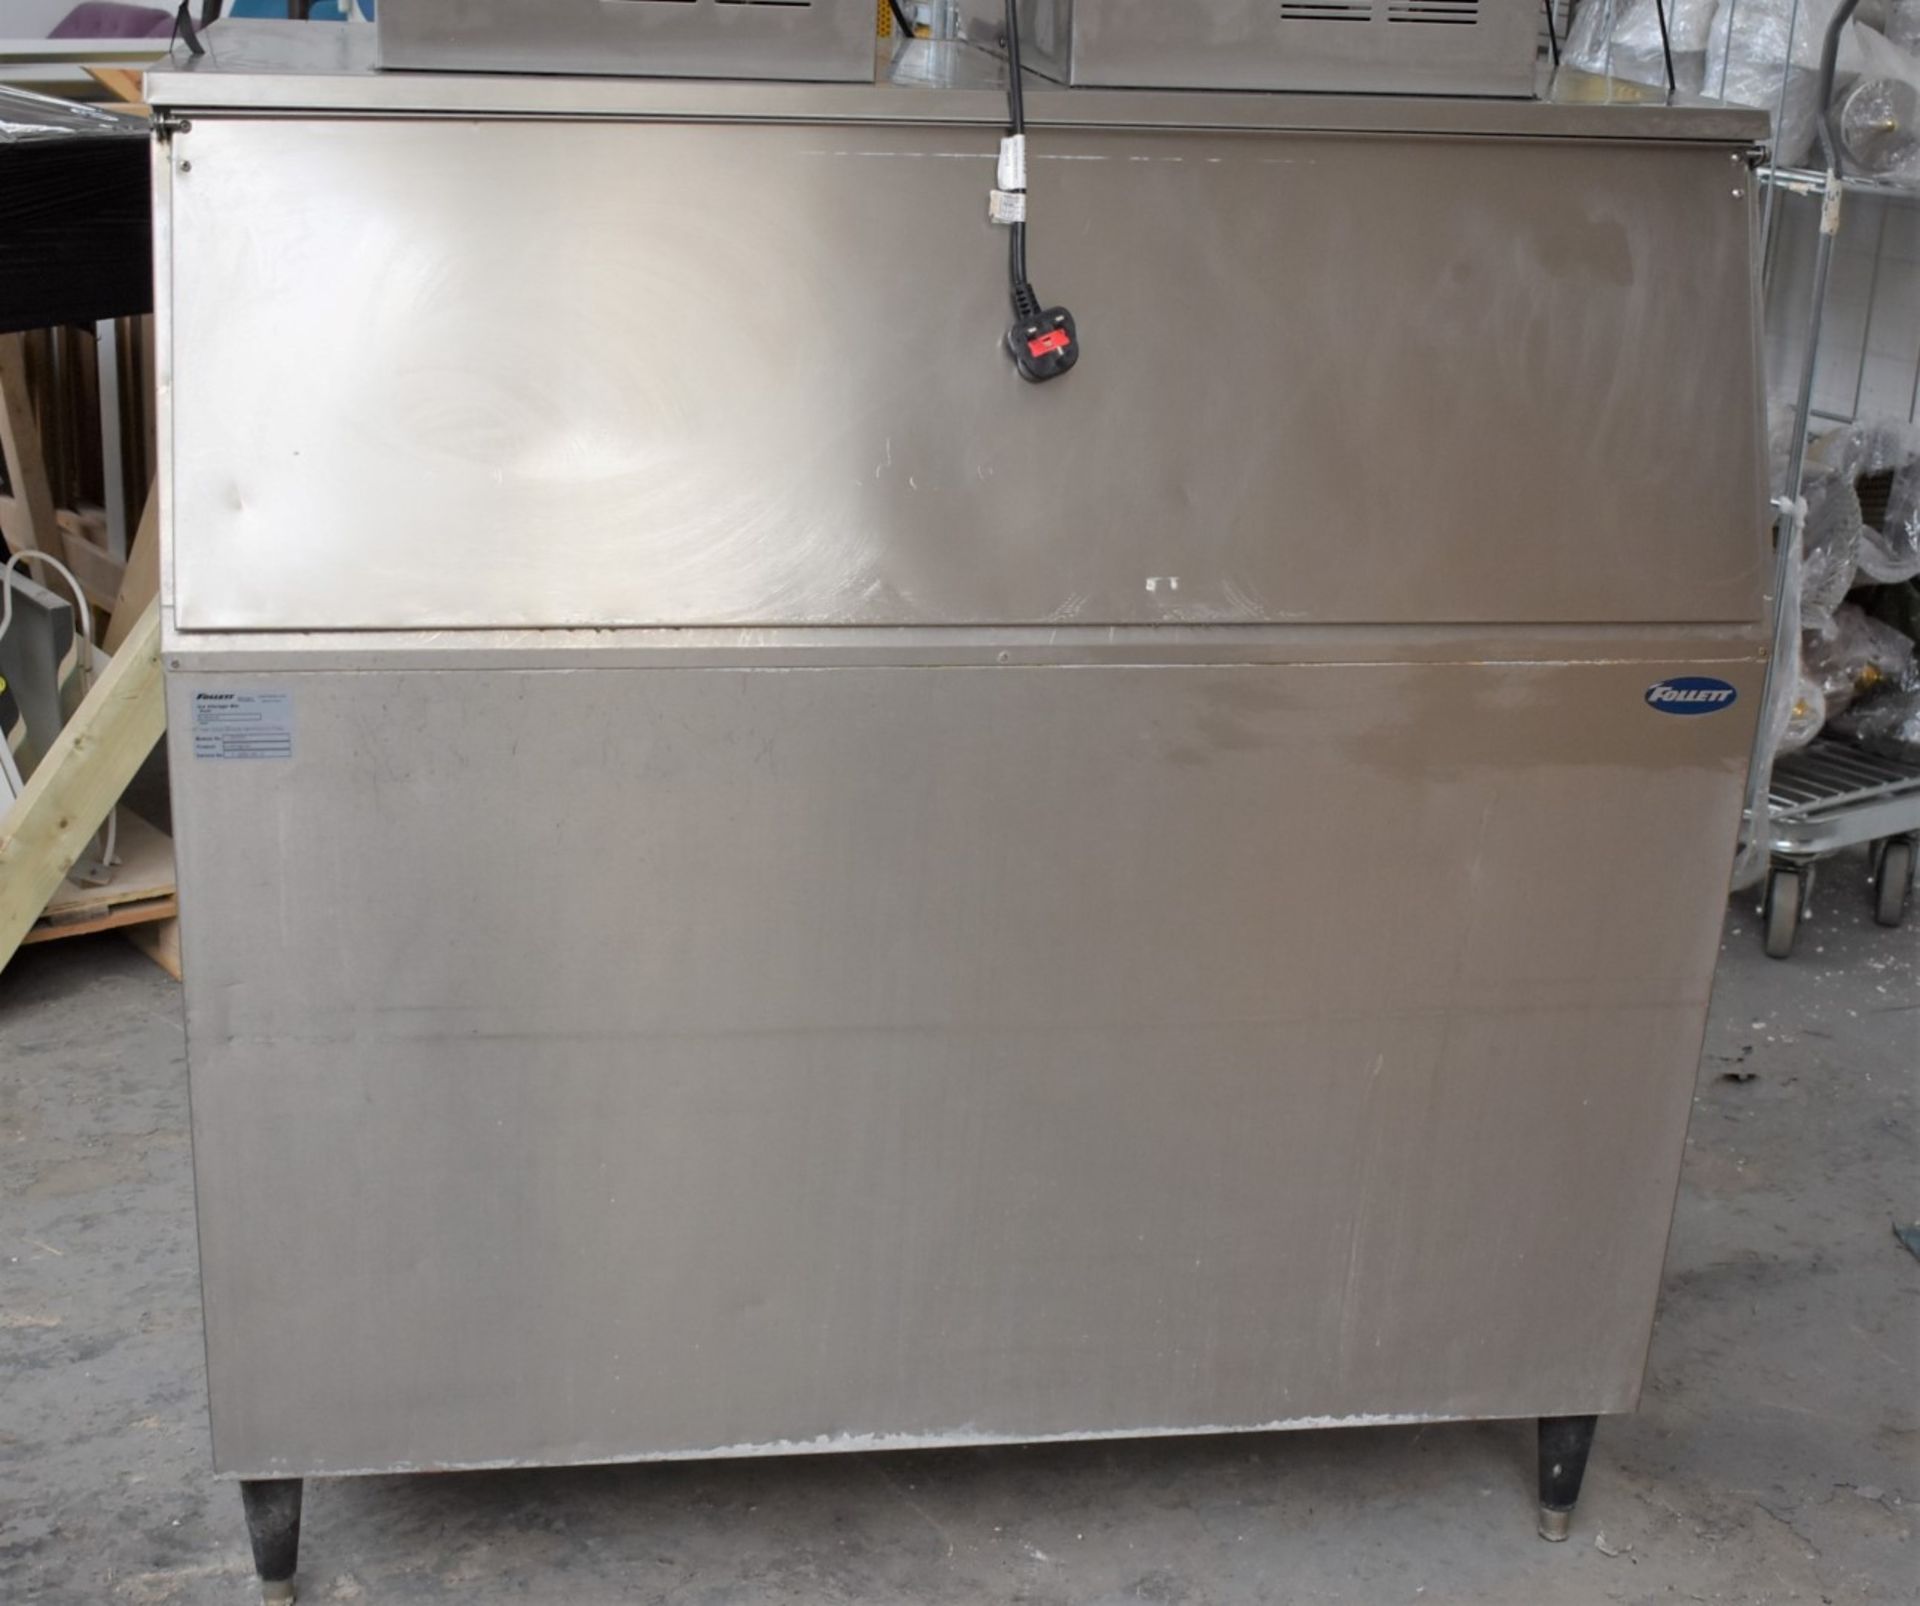 1 x Commercial Ice Maker With a Follett 431kg Ice Hopper and Two Ice Cool ICS700 Ice Making Heads - Image 4 of 15